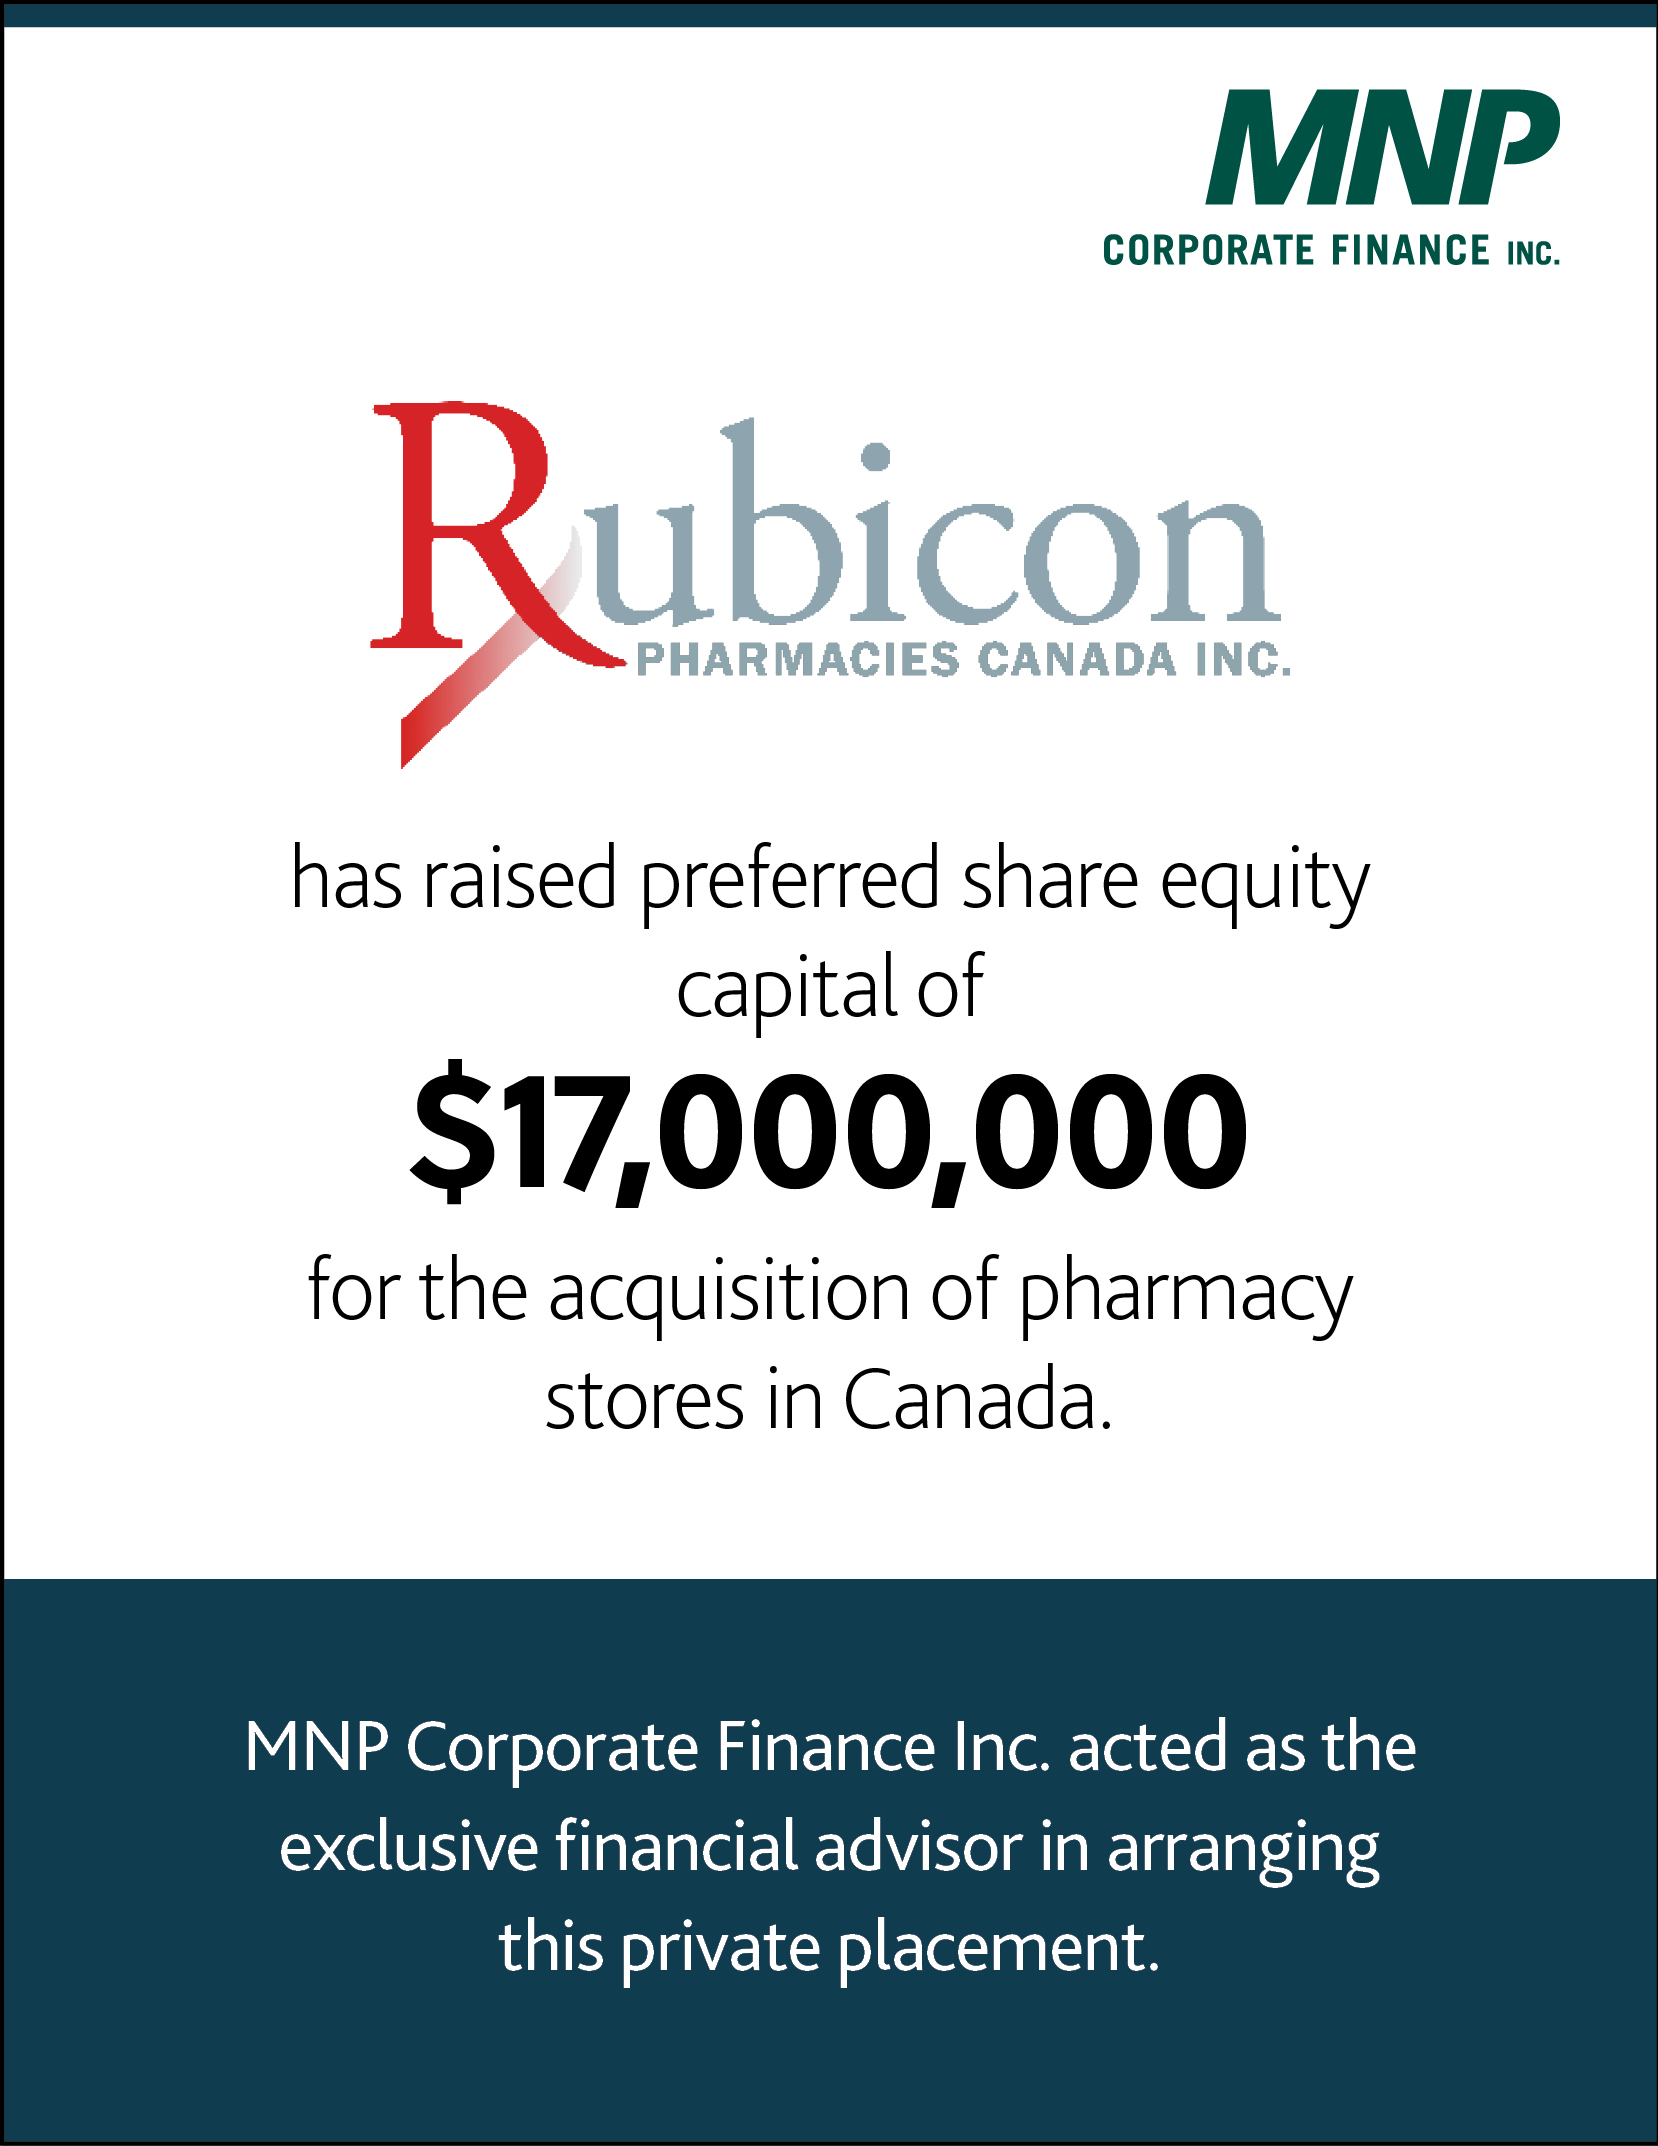 Rubicon Pharmacies Canada Inc. has raised preferred share equity capital of  $17,000,000  for the acquisition of pharmacy stores in Canada.